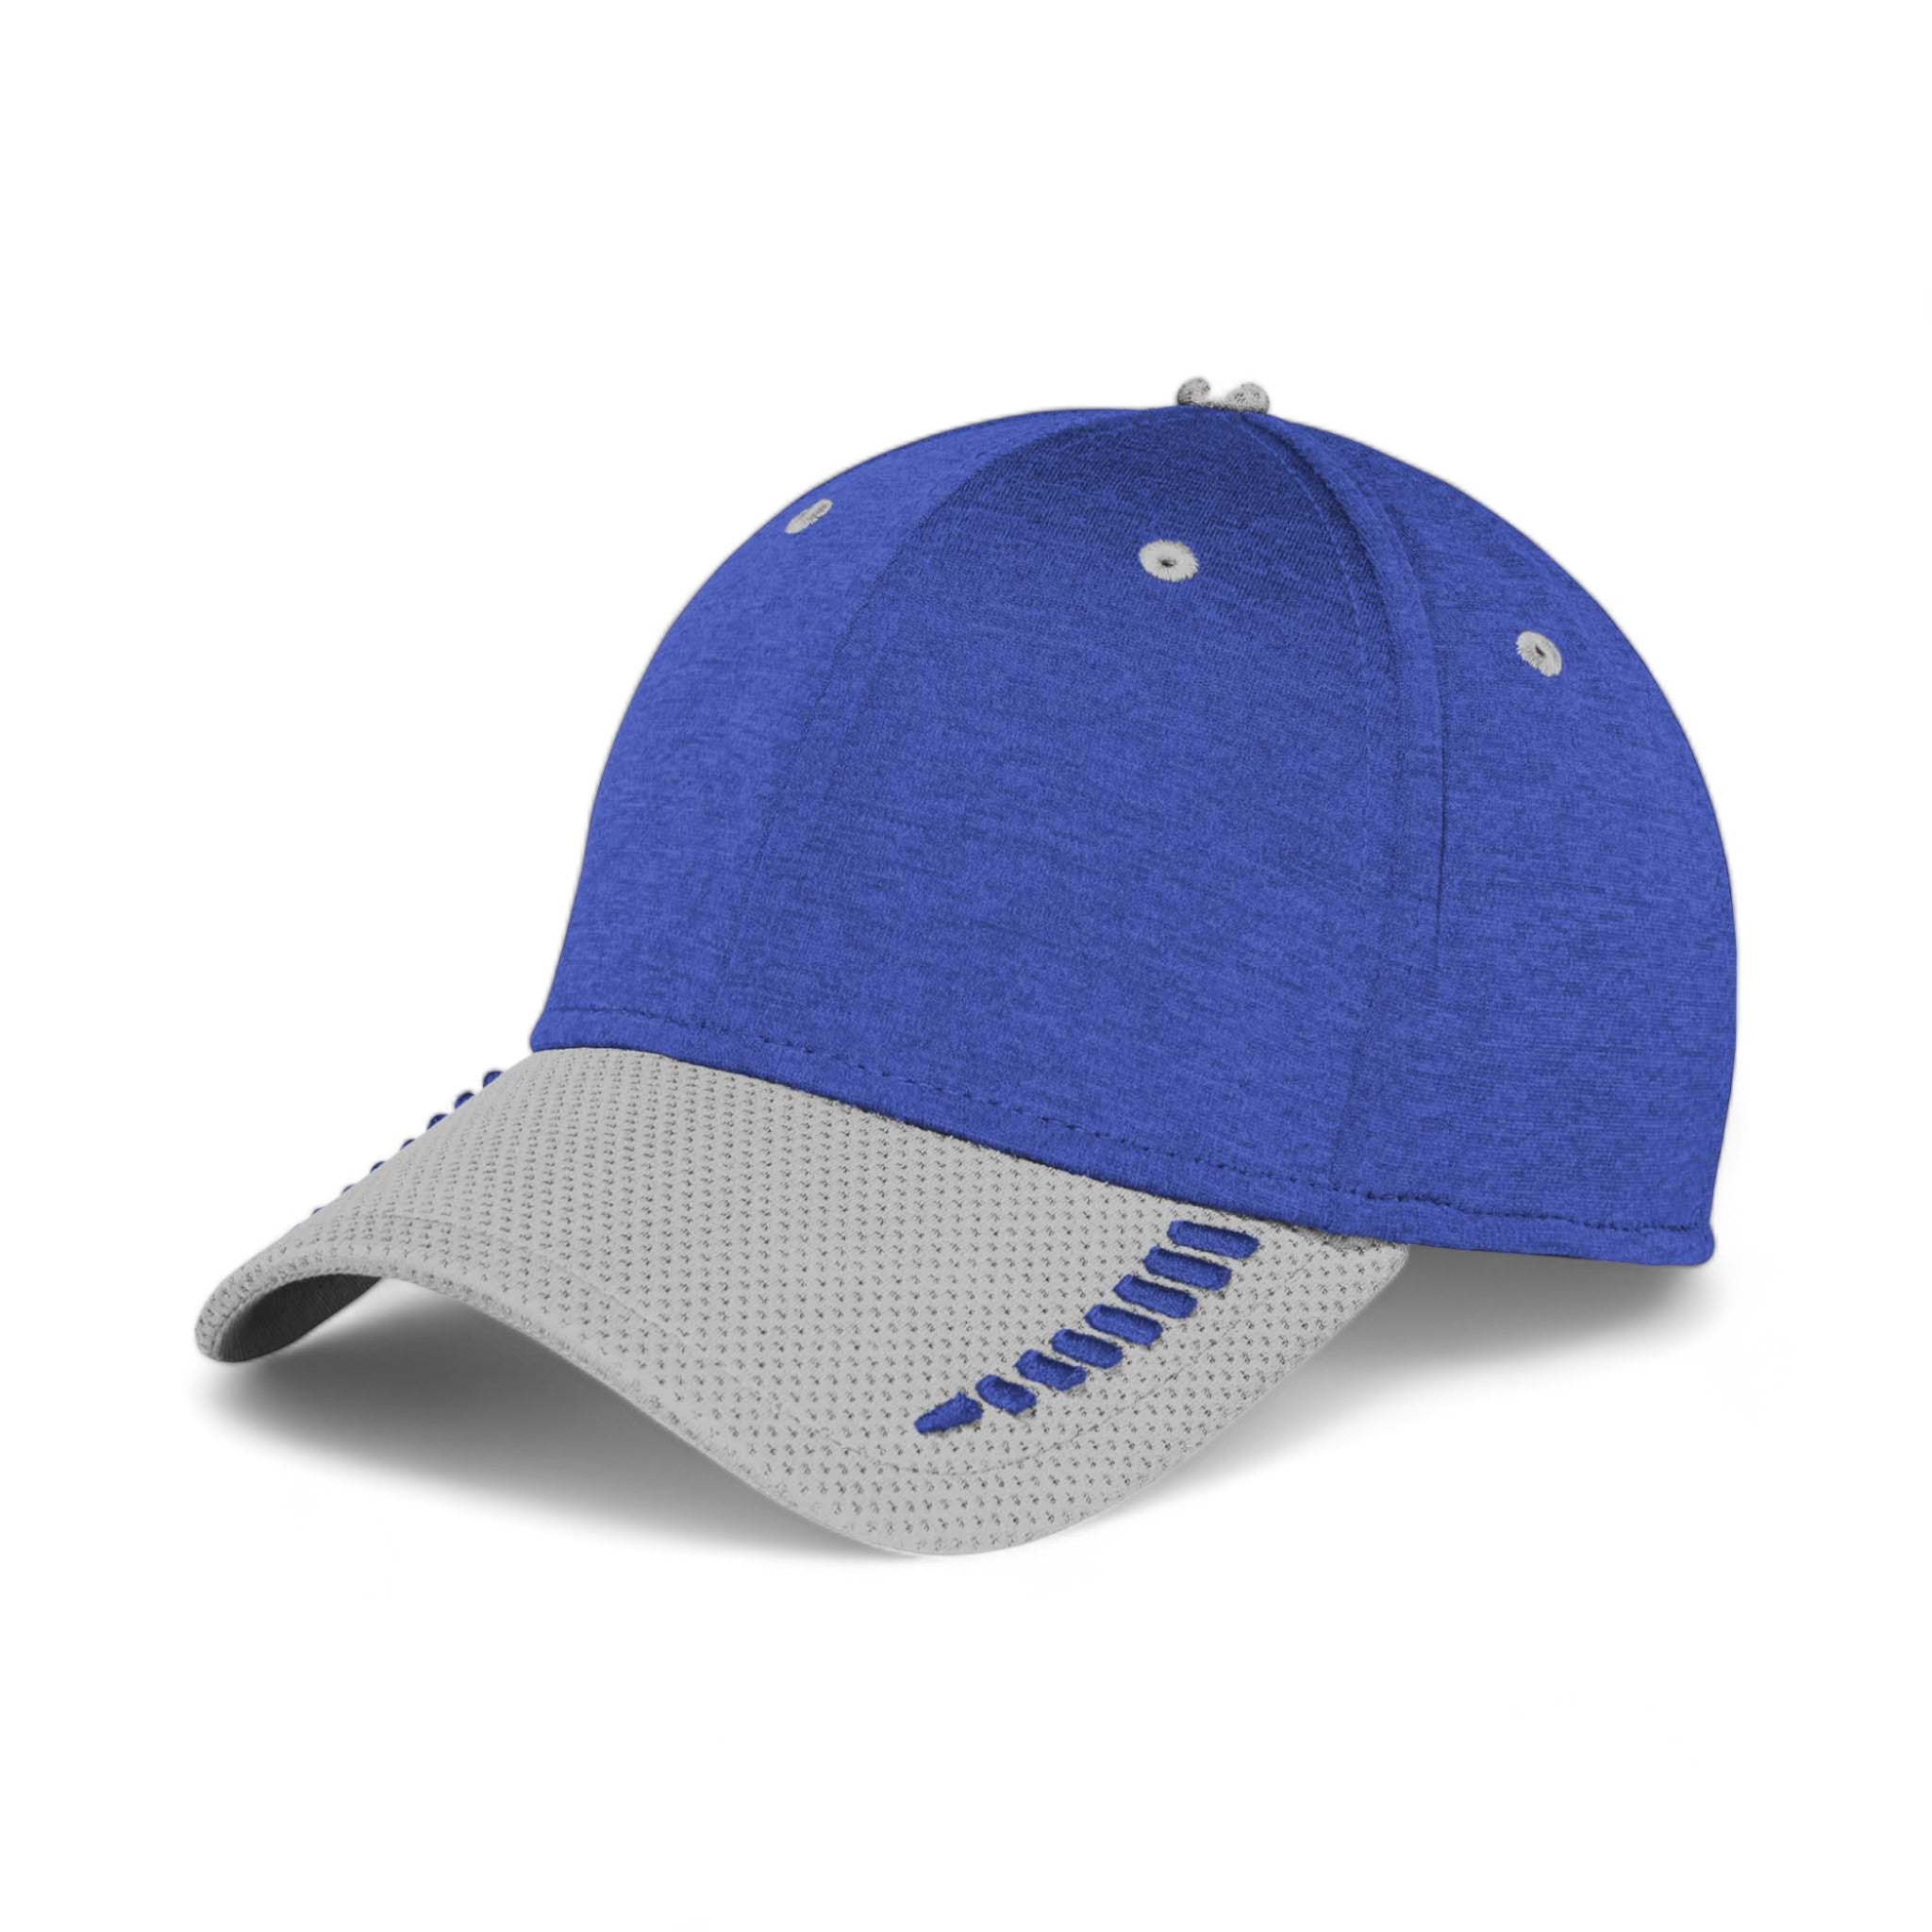 Side view of New Era NE704 custom hat in grey and royal shadow heather